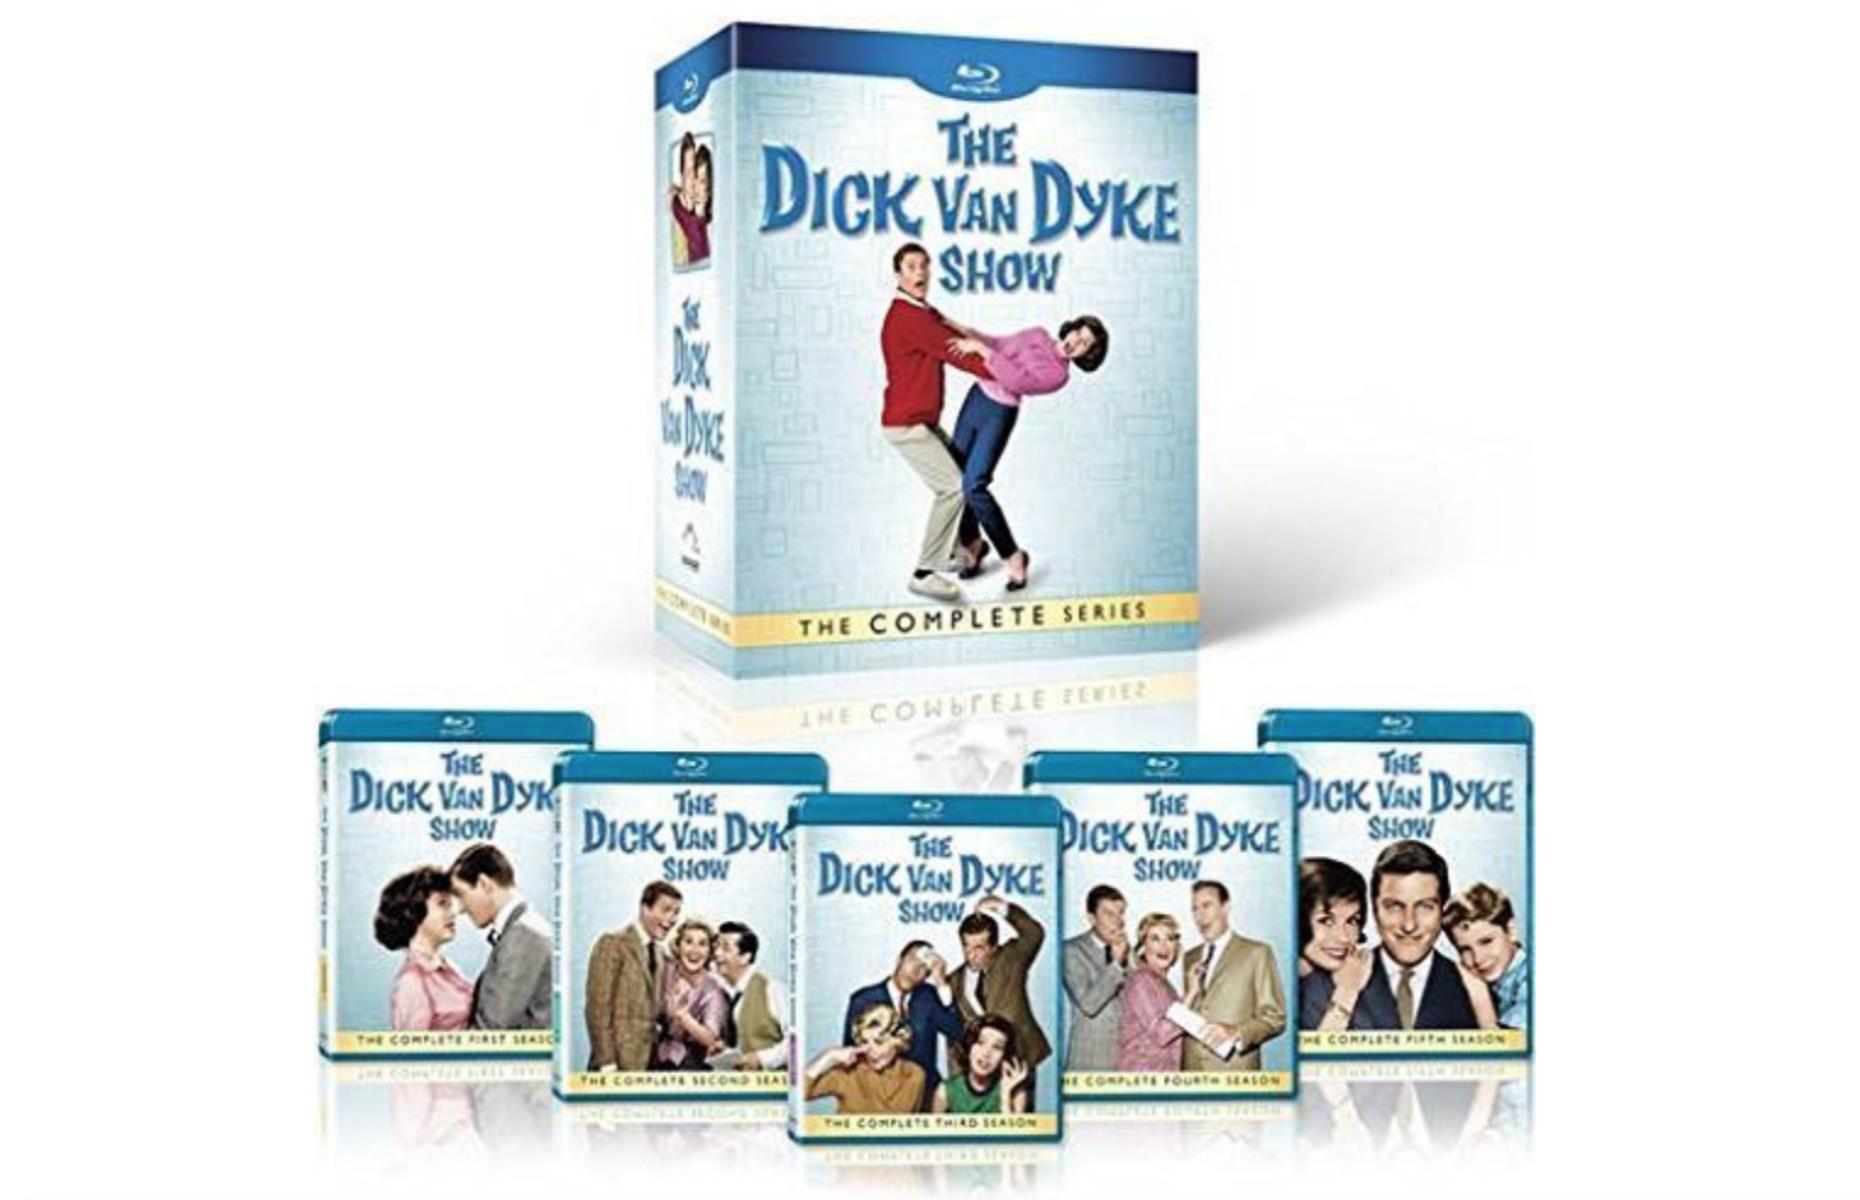 The Dick Van Dyke Show: The Complete Series